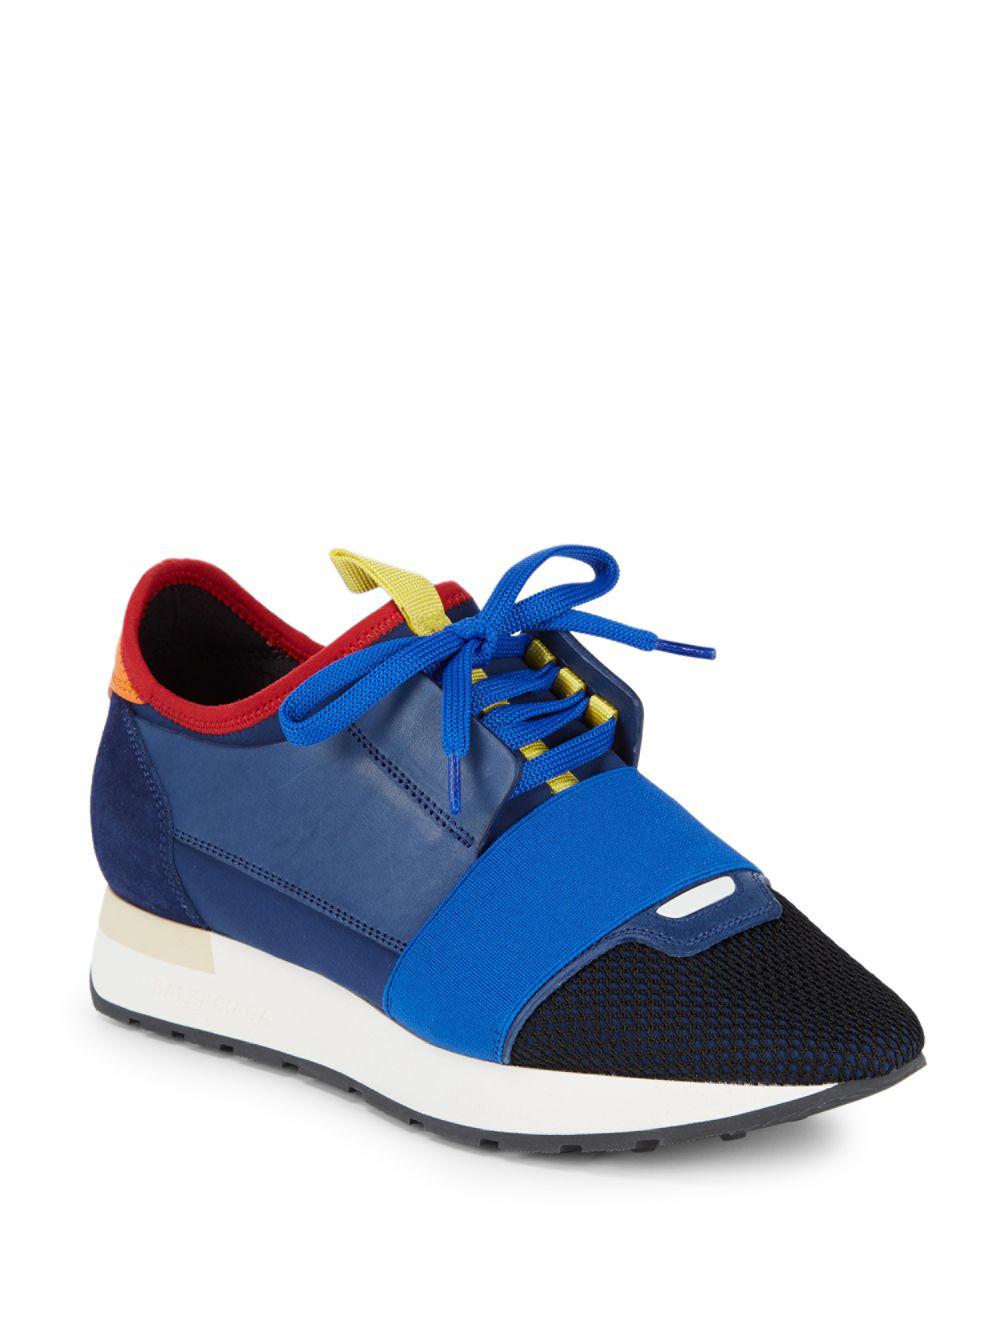 Lyst Balenciaga Mixedmedia Leather Laceup Sneaker in Blue